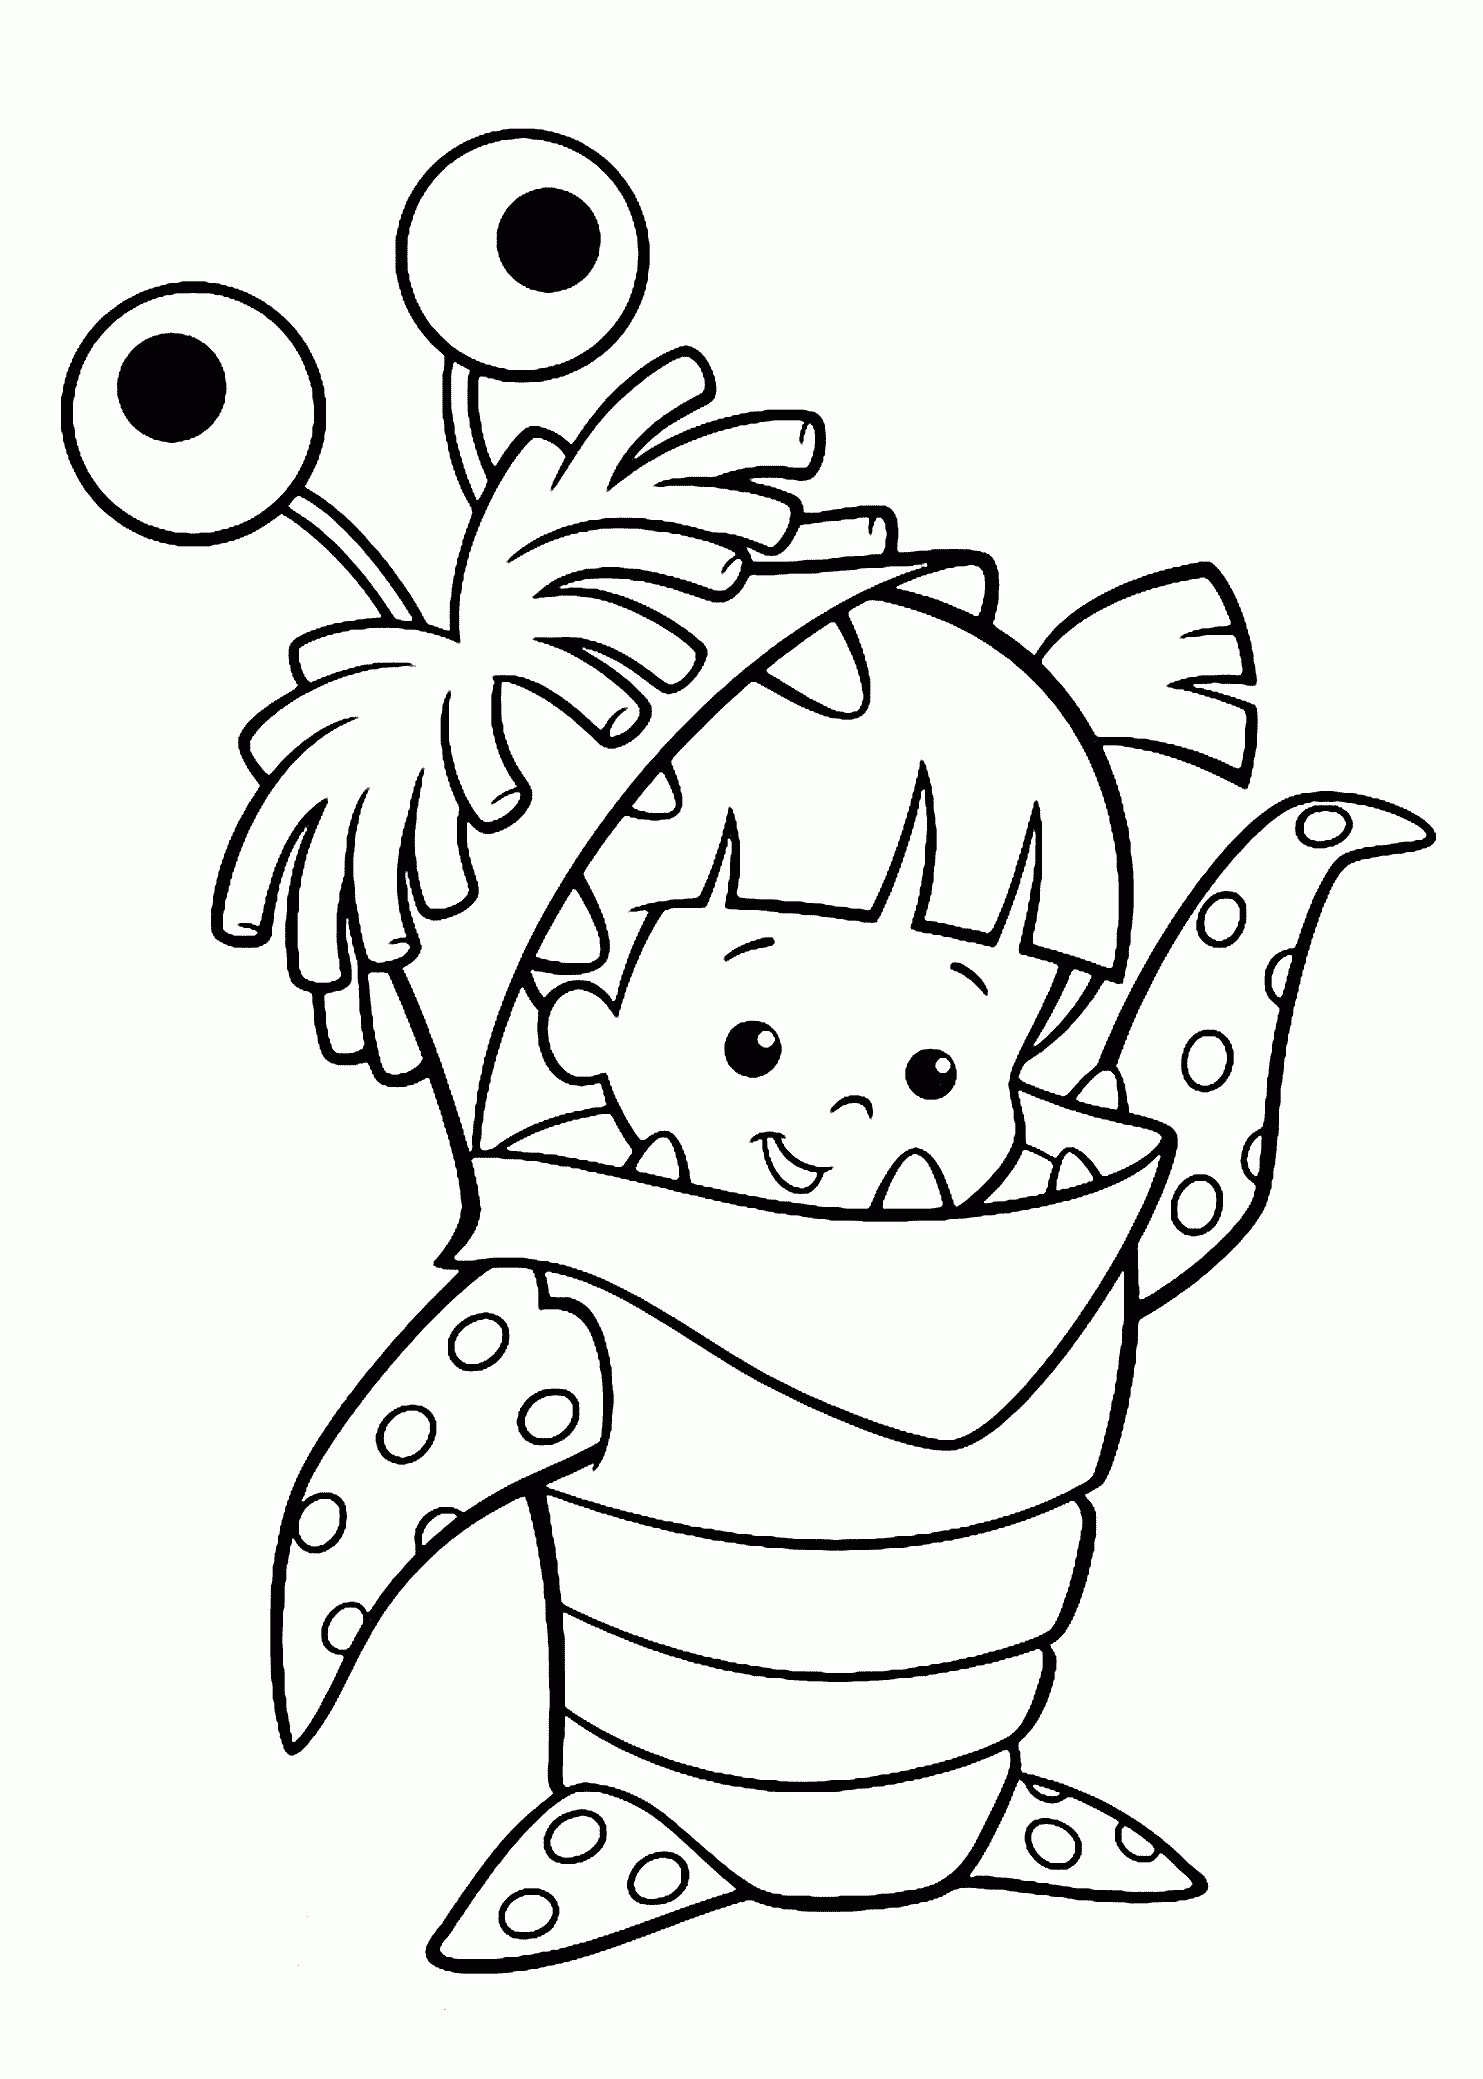 Free Coloring Pages Philip And The Ethiopian Monsters Inc Coloring Book Pages Best Coloring Pages Collection